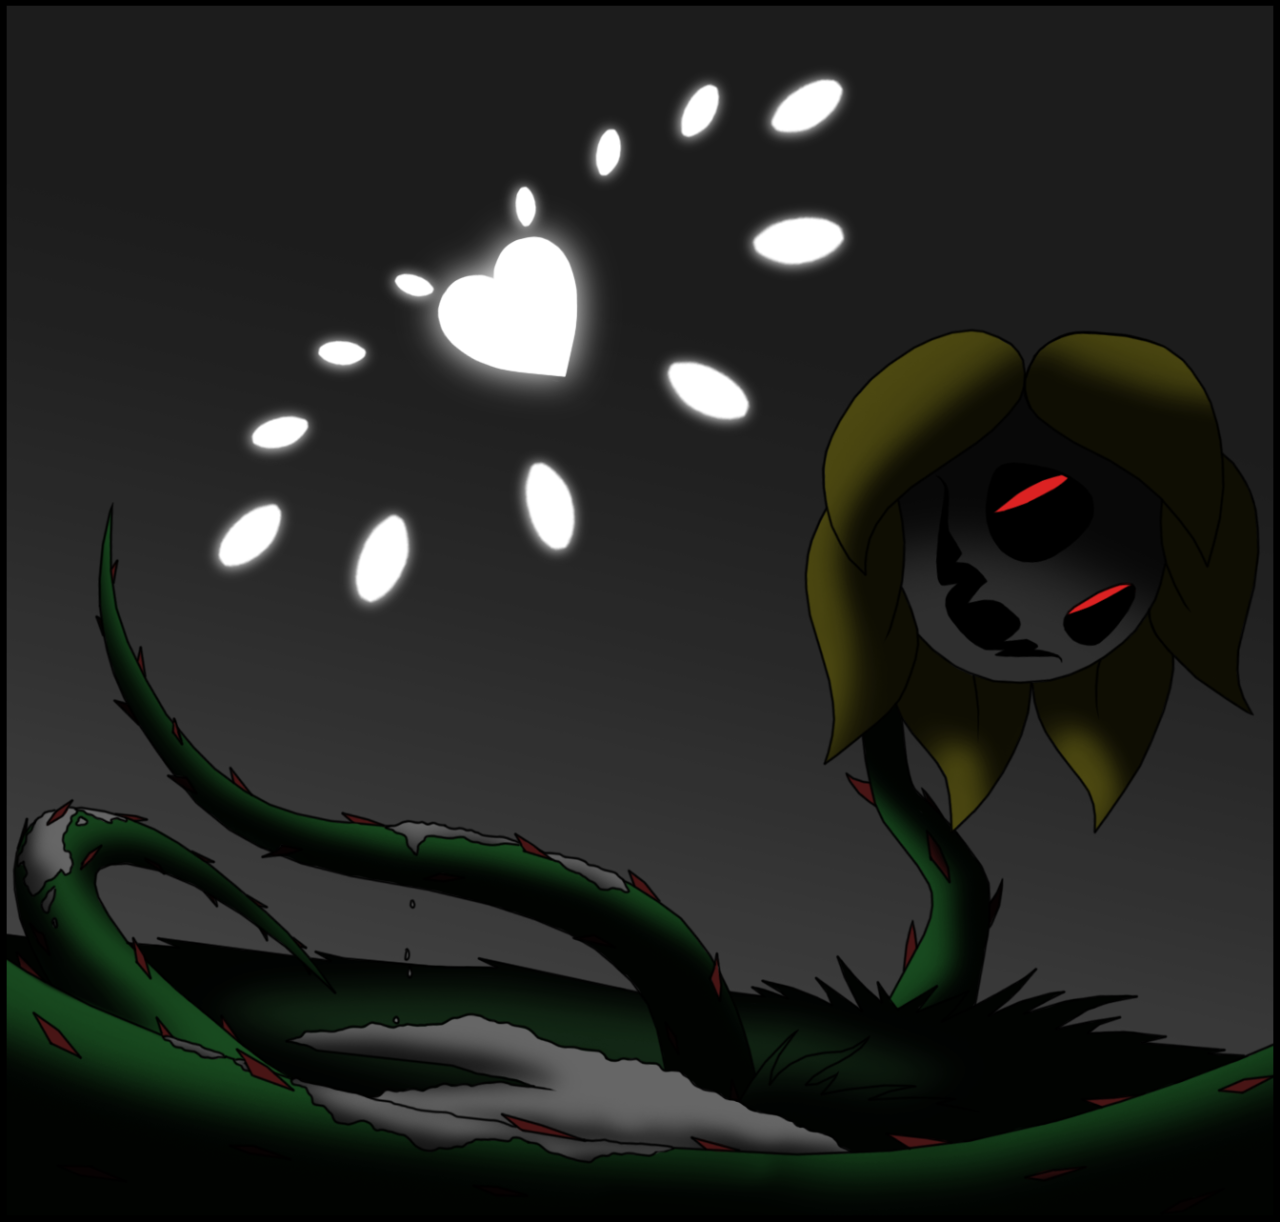 I never thought I'd draw Omega Flowey, since I consider the whole